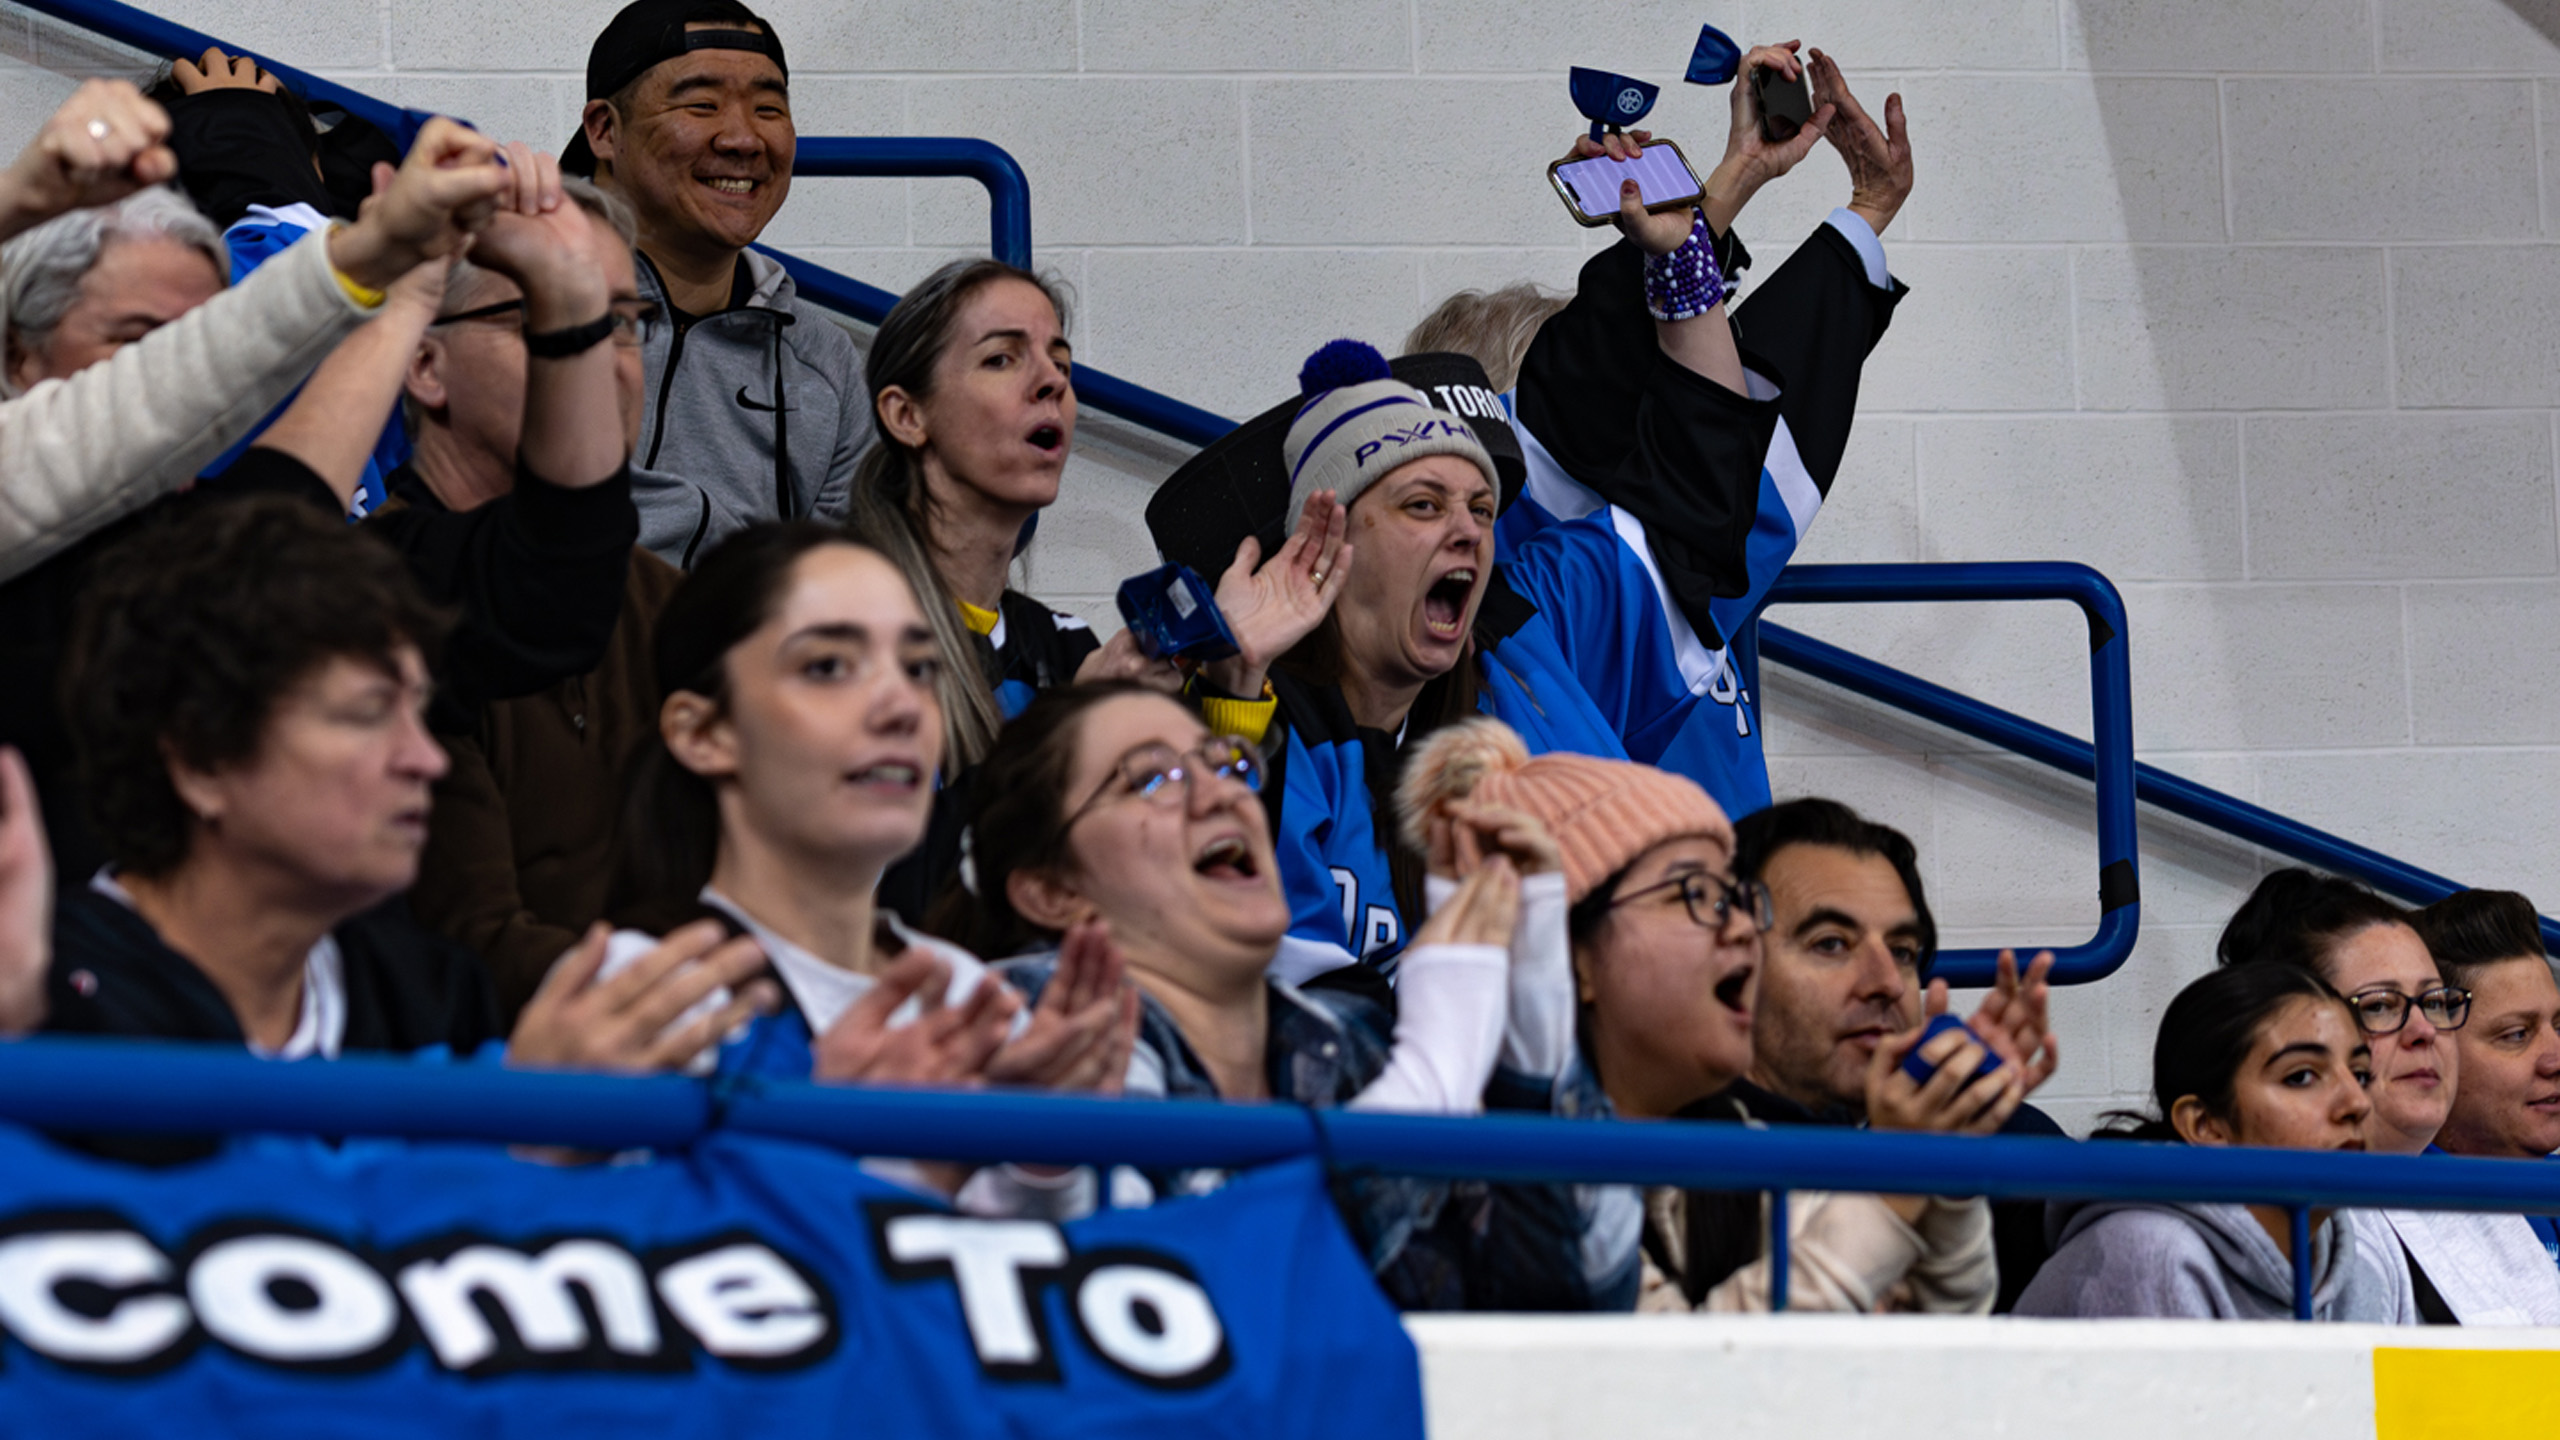 PWHL Toronto fans scream and cheer on the team